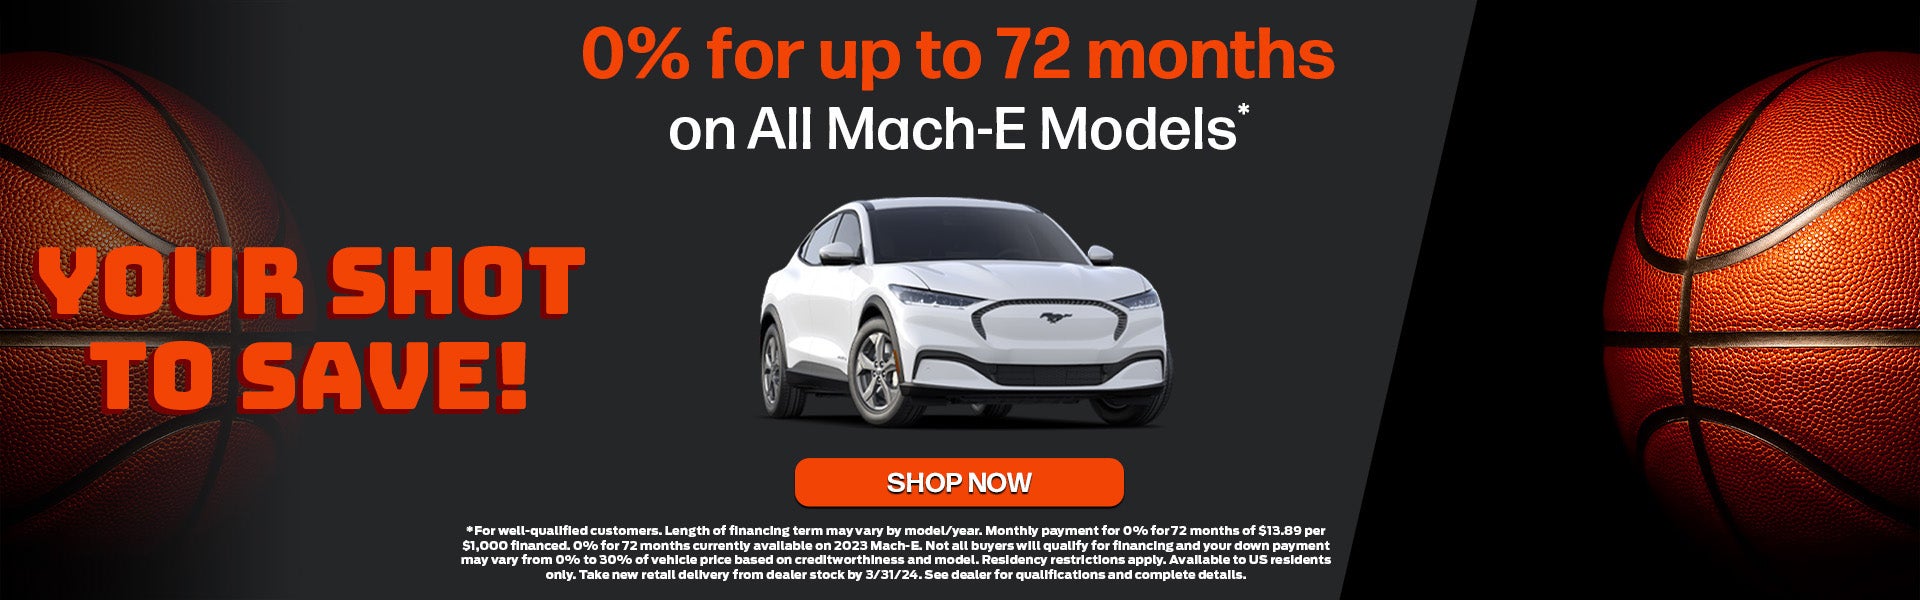 Save on Ford Mustang Mach-E